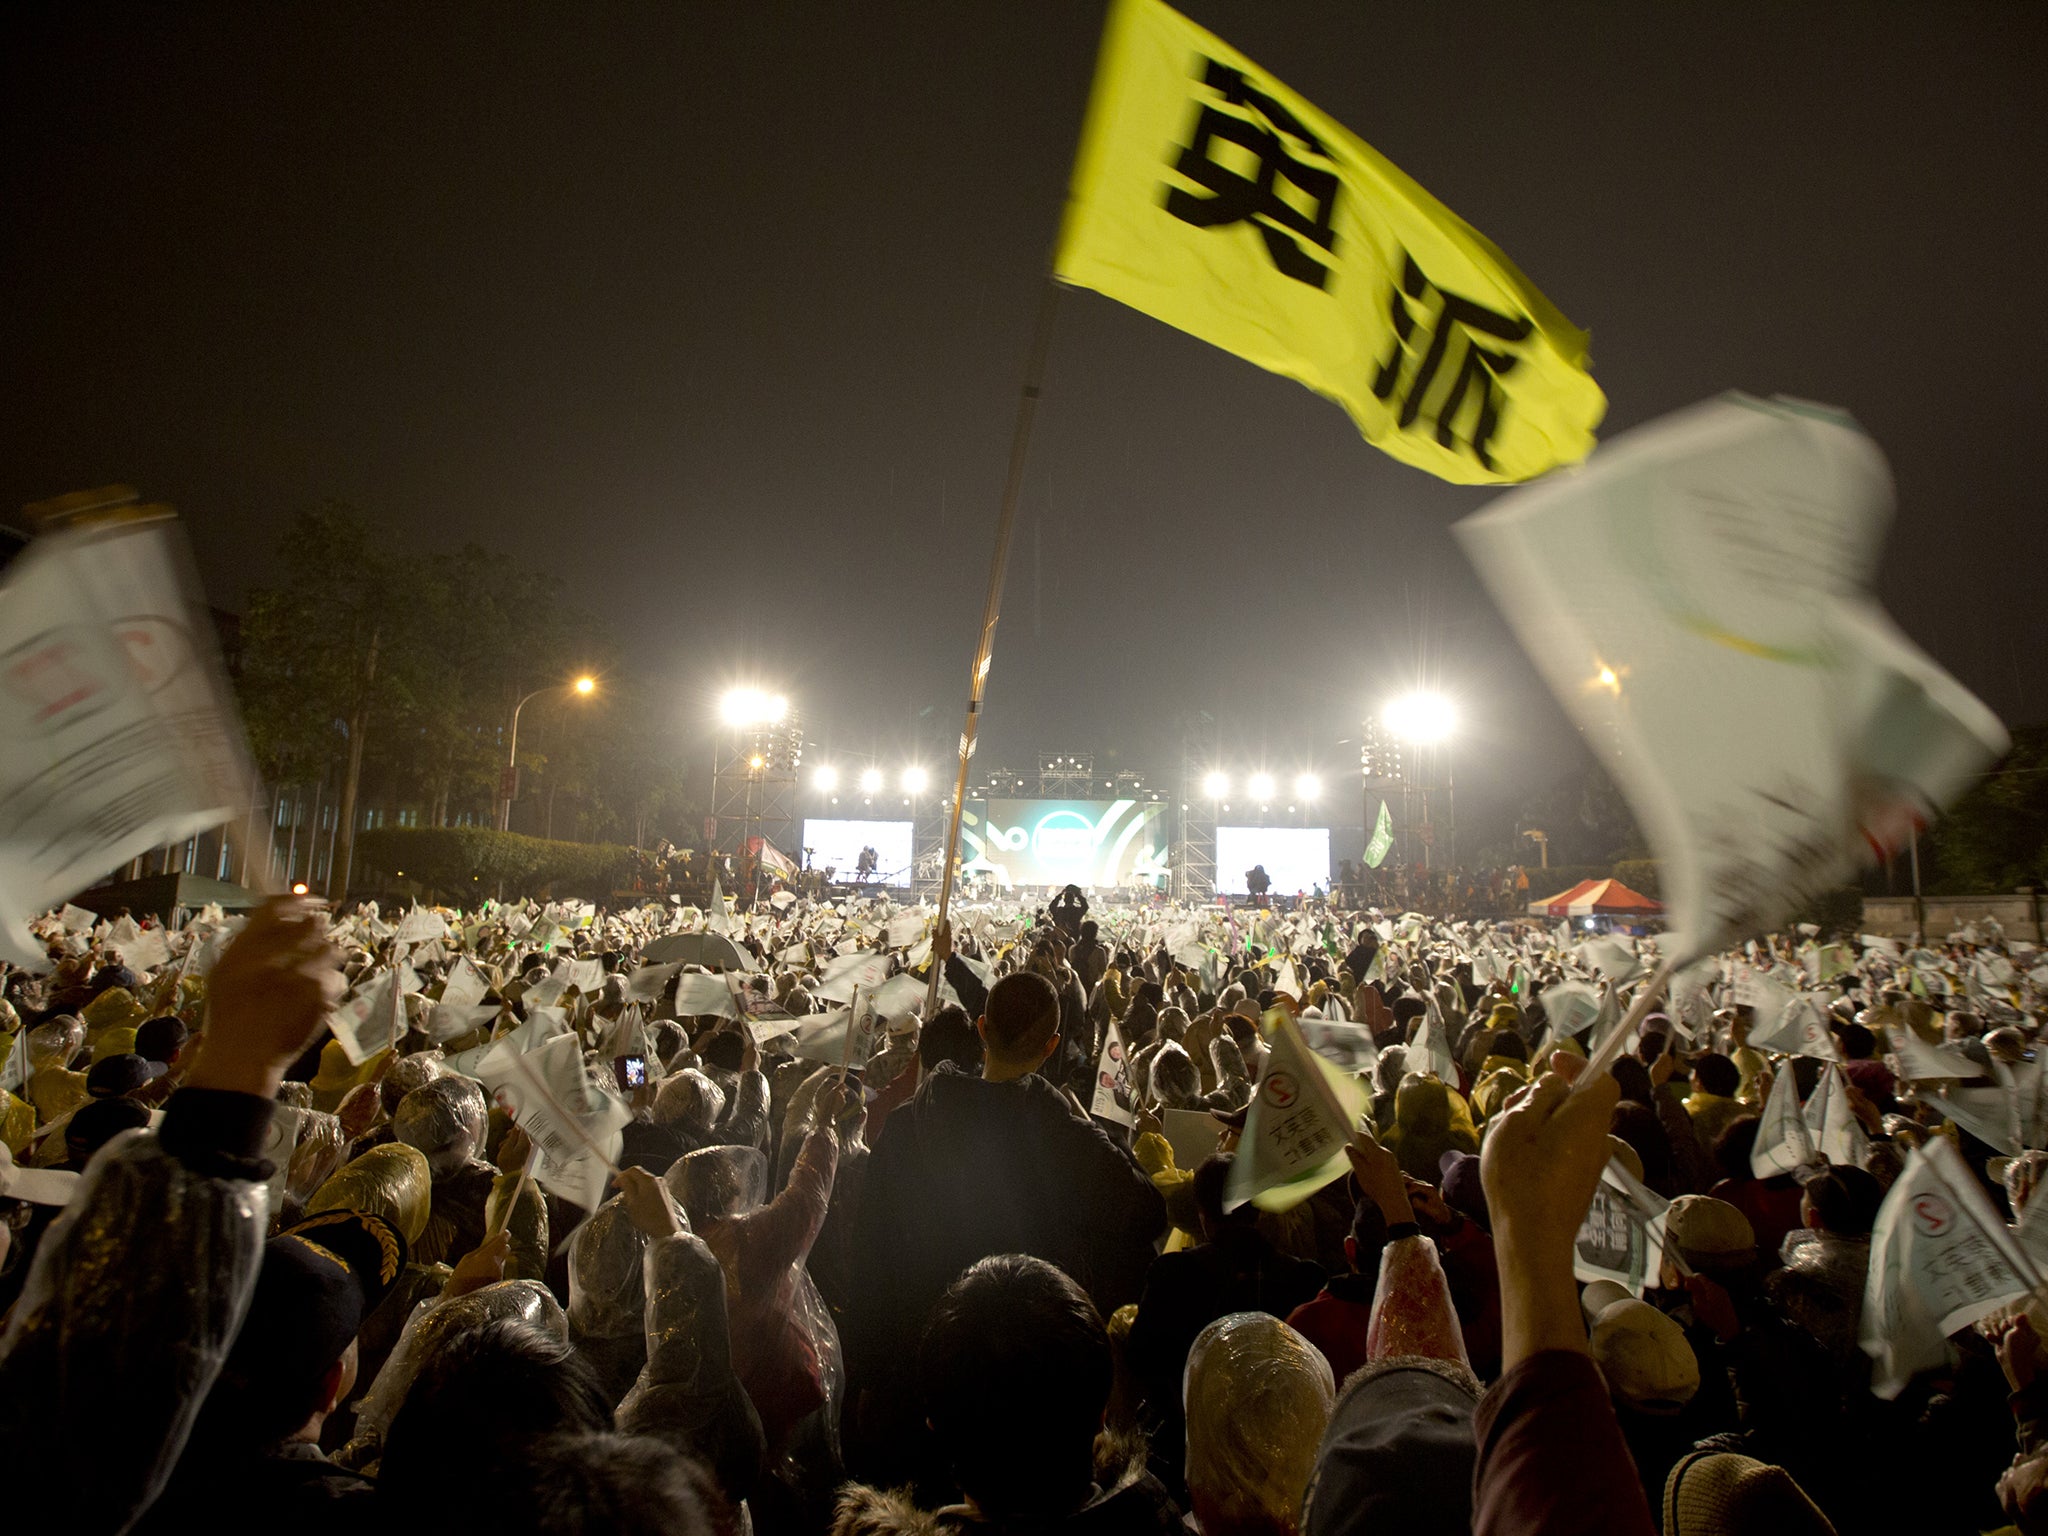 A flag with "Ing Clique" sign on flies in the sky during a rally in Taipei, Taiwan. Tsai Ing-wen, leader of the Democratic Progressive Party, leads in most polls ahead of Saturday's election in the island of 23 million people.